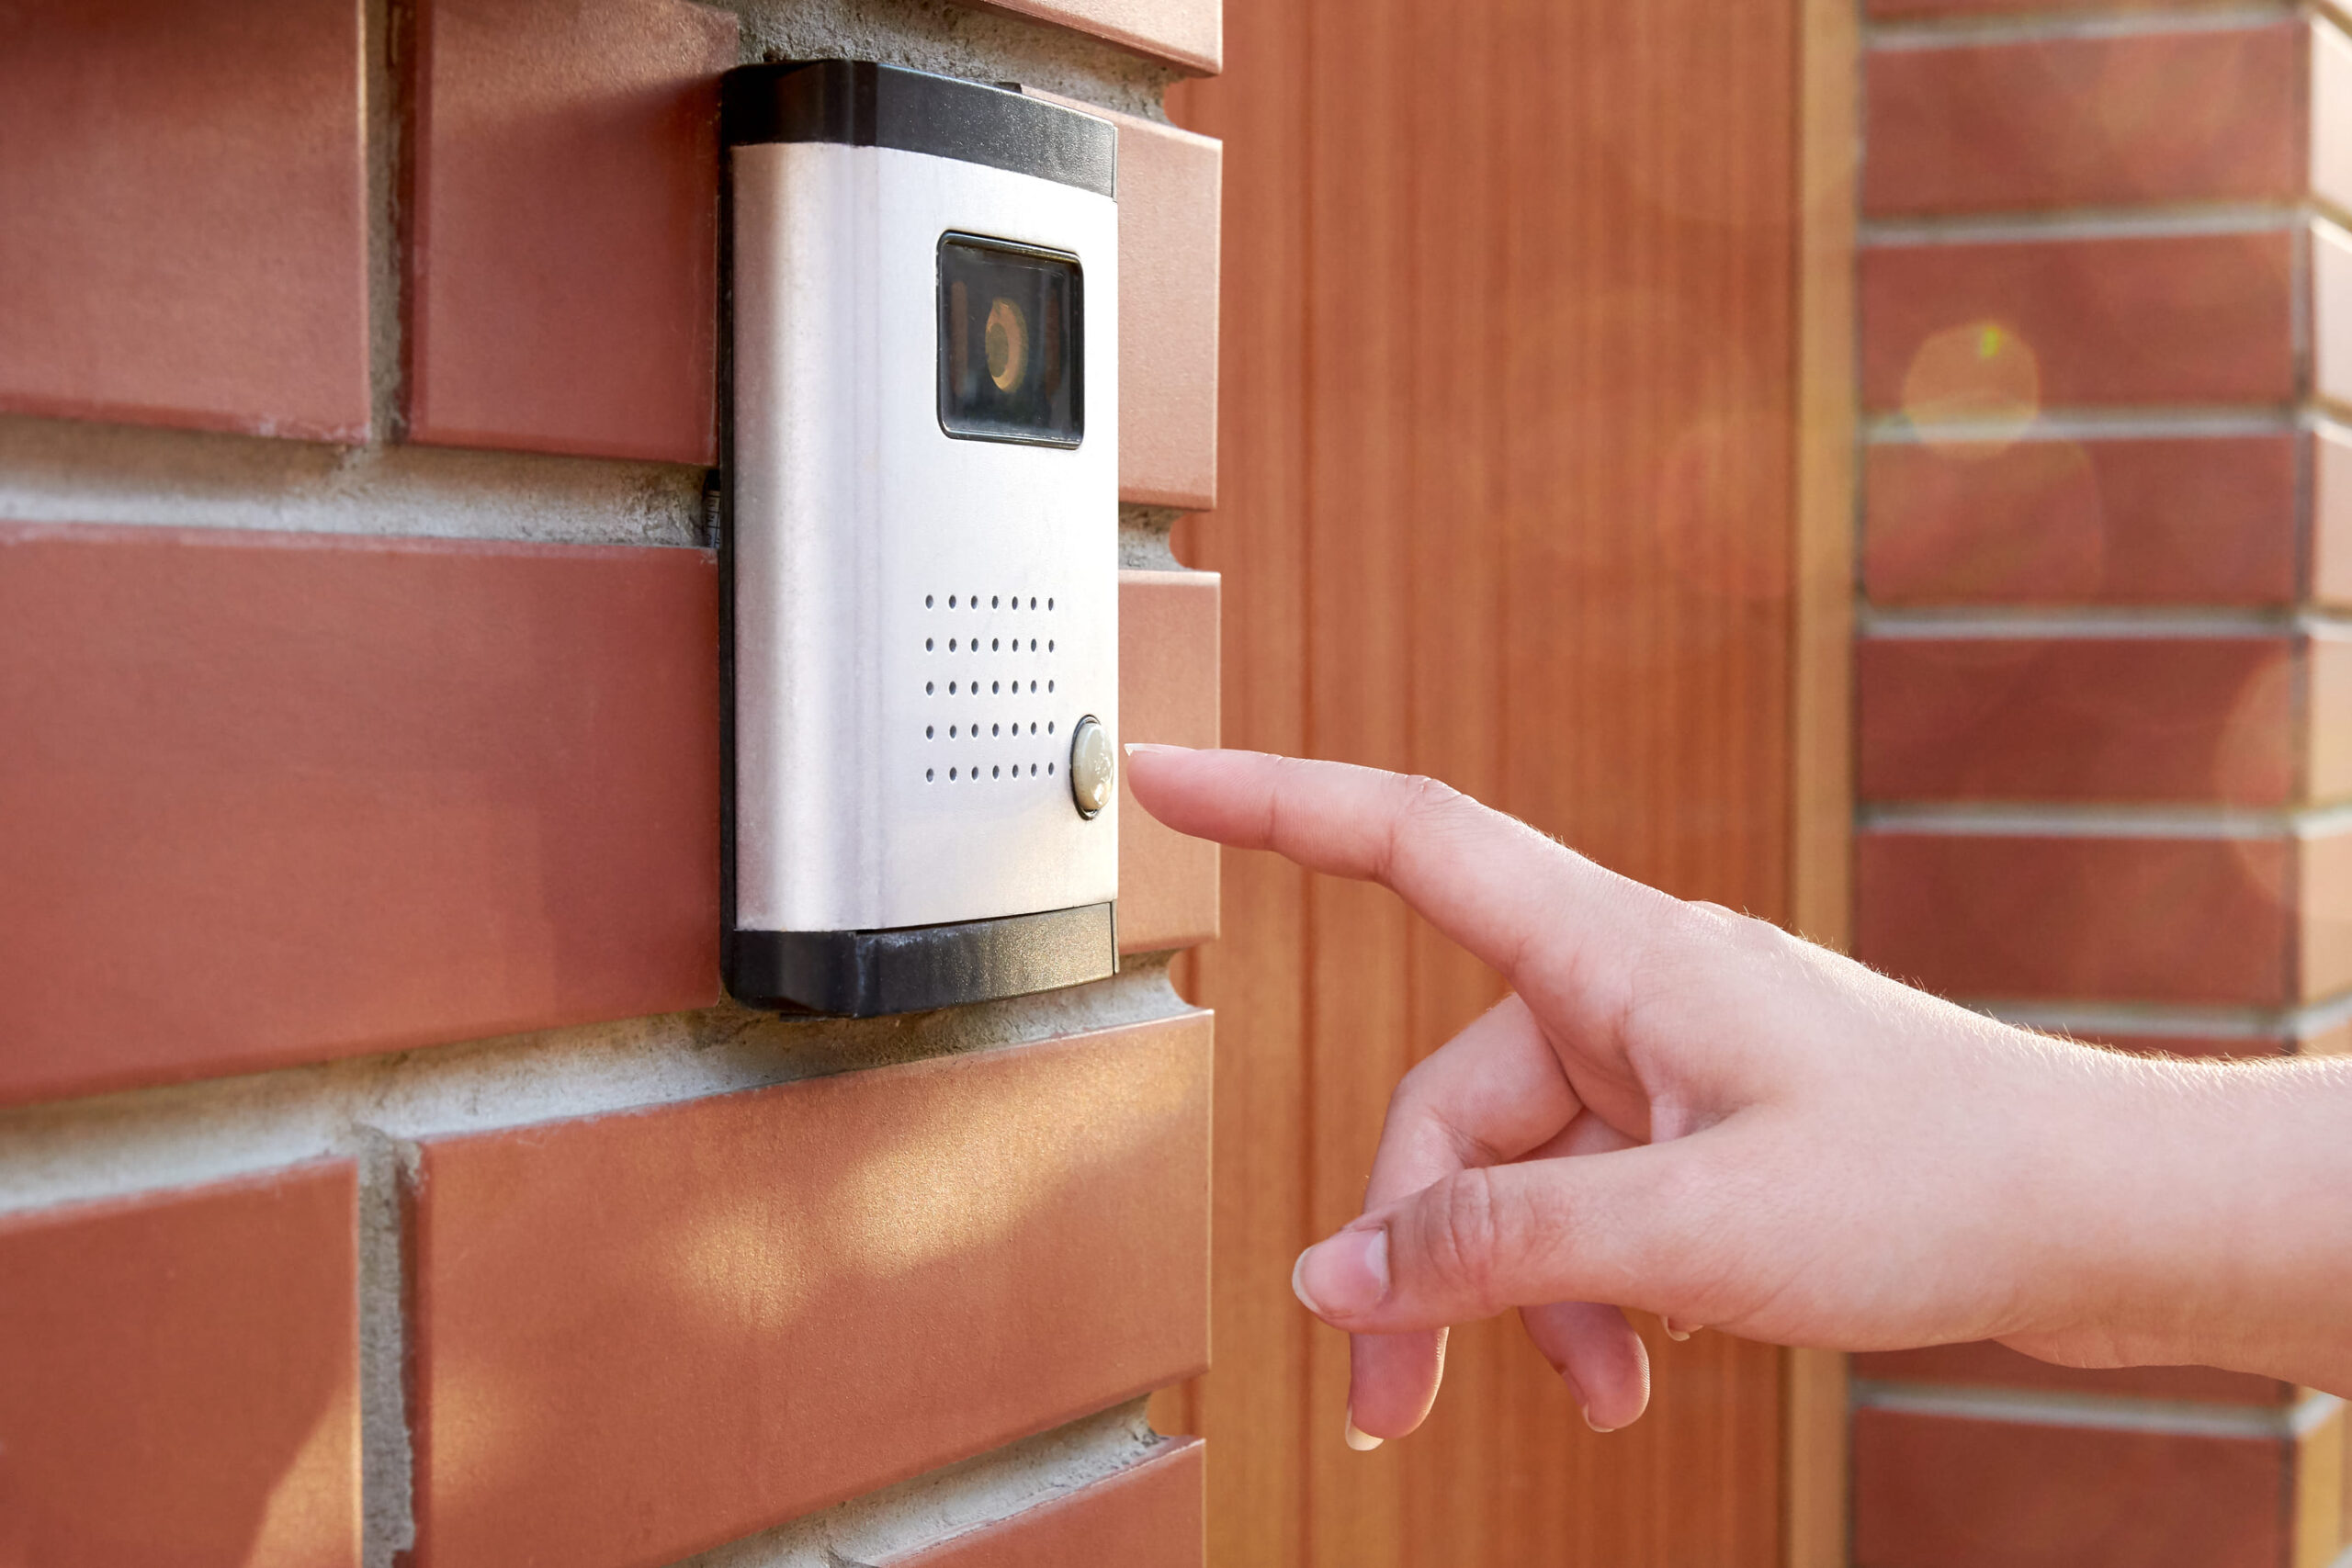 A doorbell camera has become fairly common and is just one example of a Smart Home technology that may add value and protection to your home.